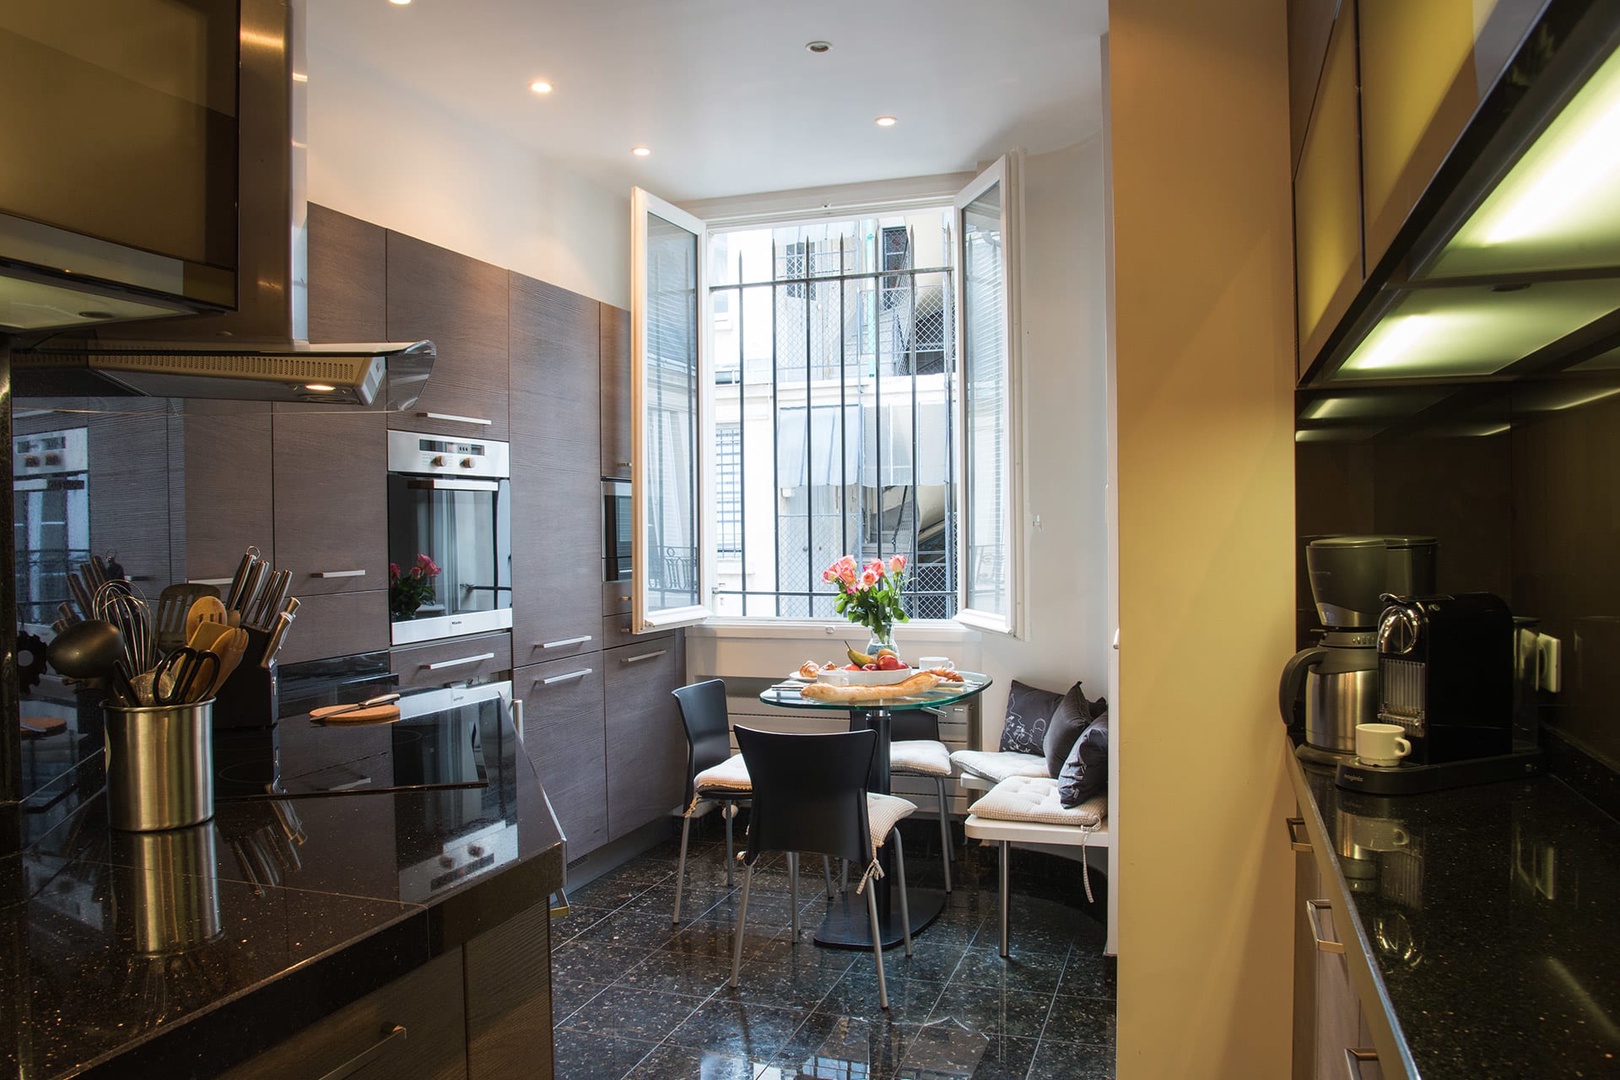 The fully equipped kitchen has a dishwasher and Nespresso machine.